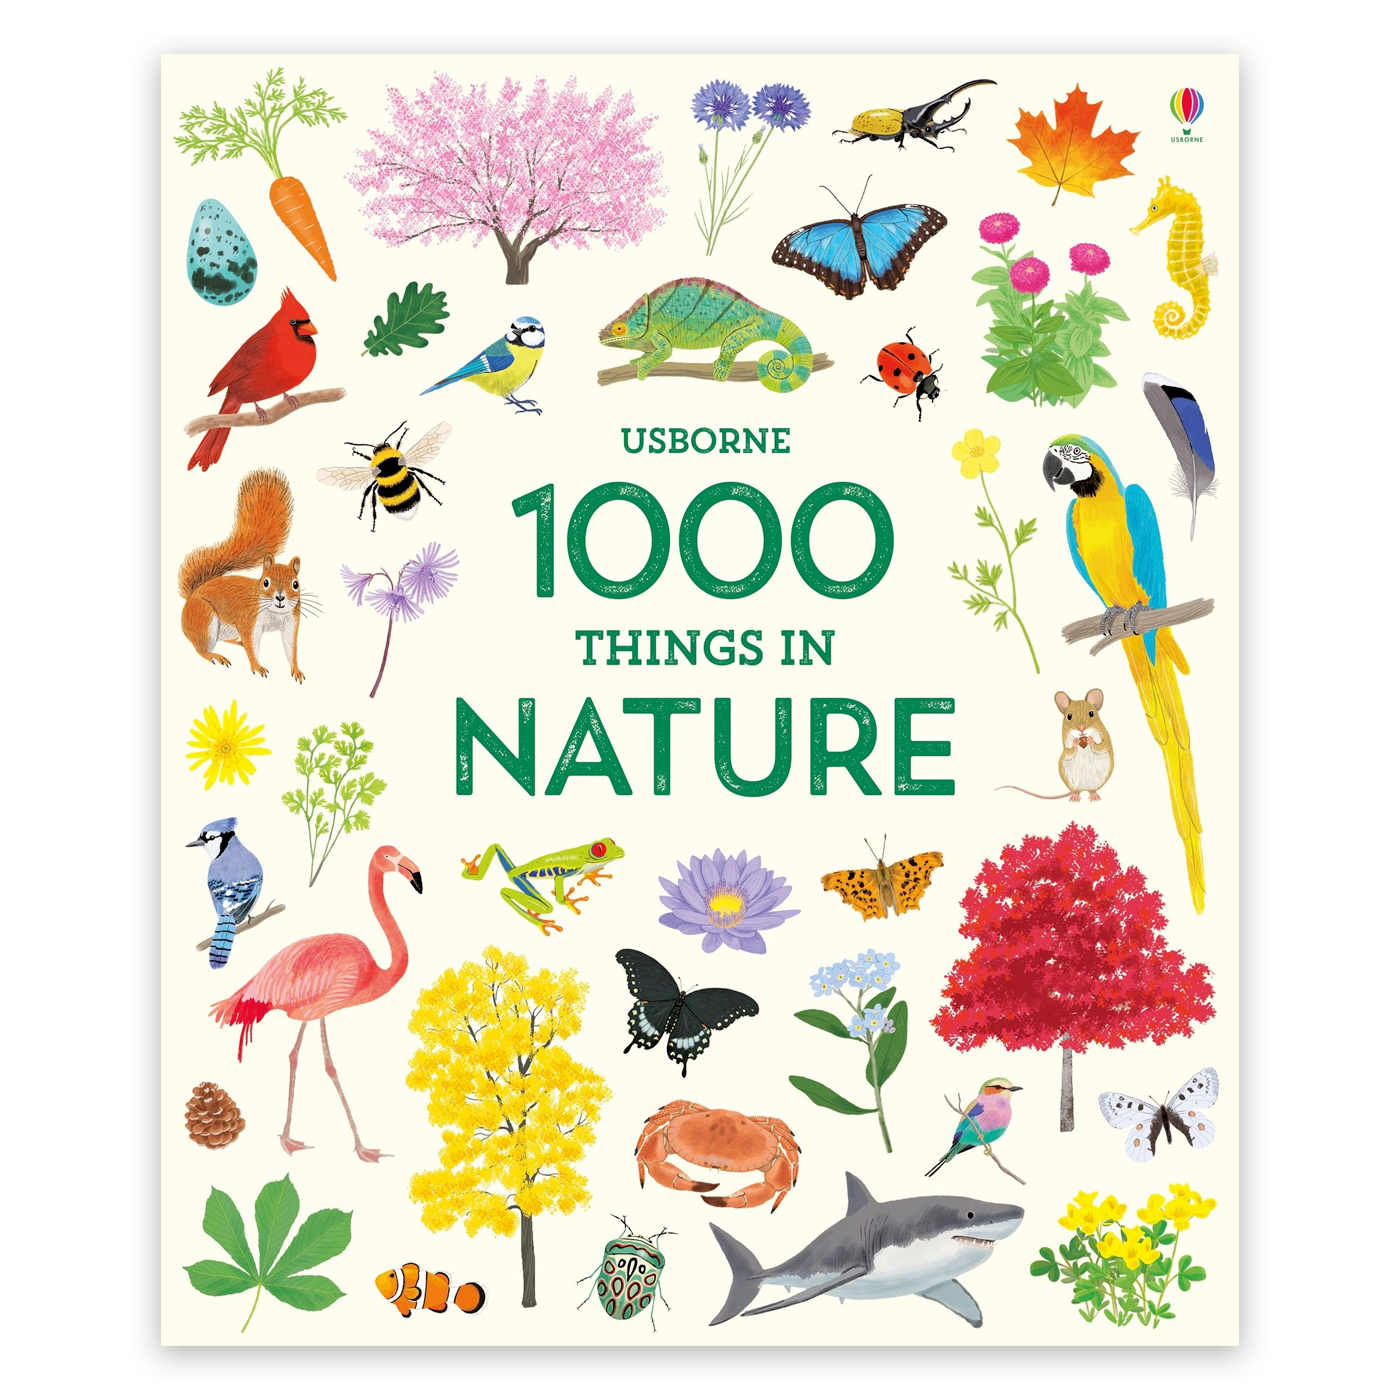  1000 Things in Nature